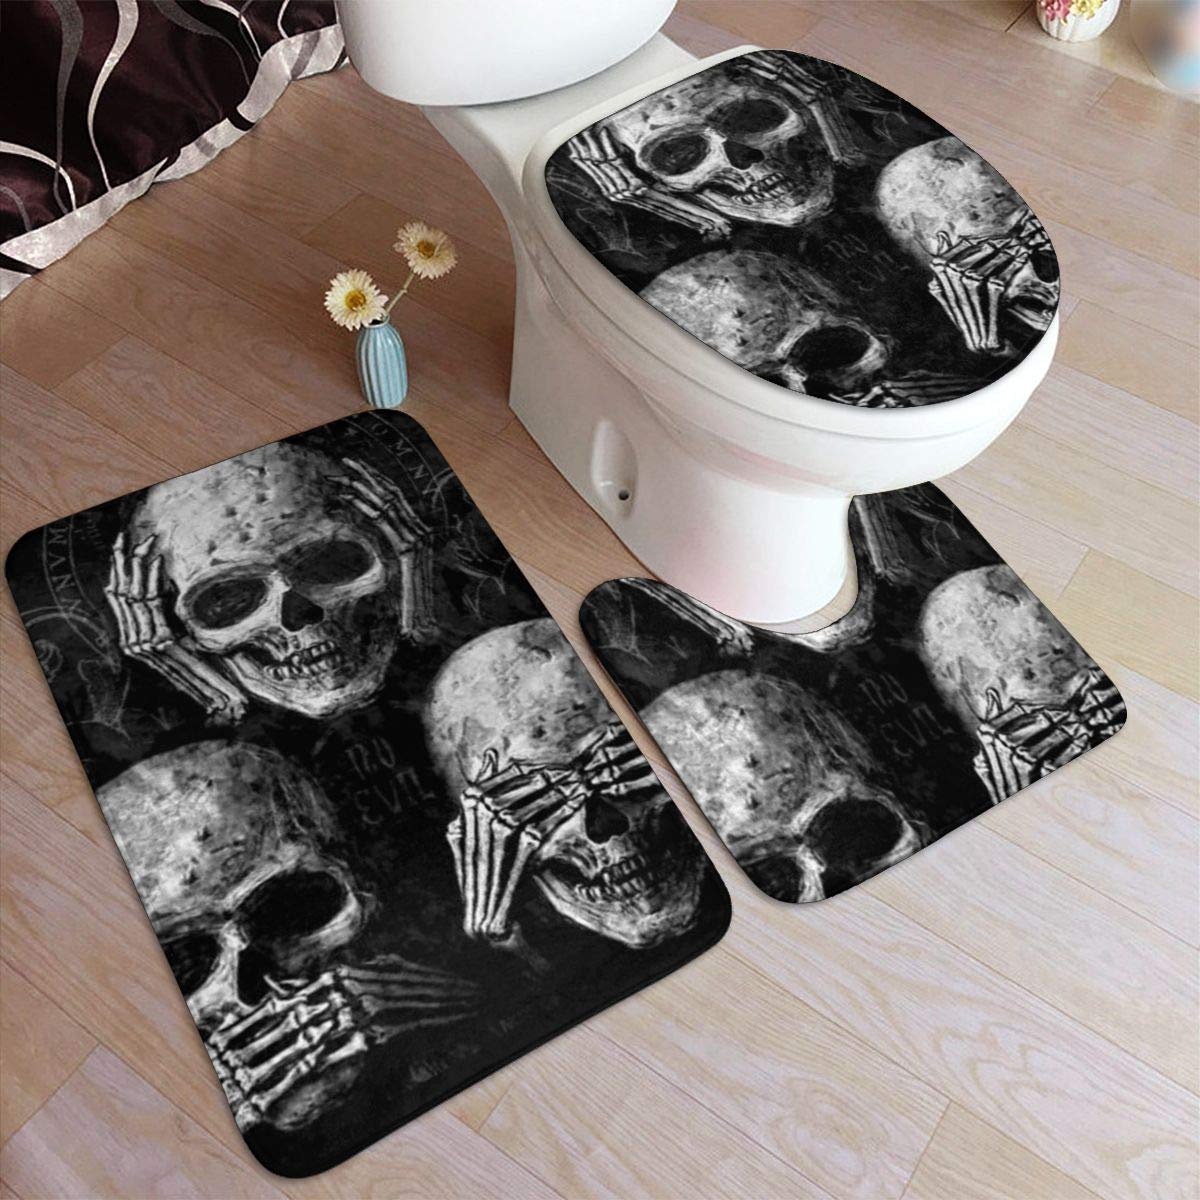 LAOLUCKY 3 Pack Bath Mat Set Large Contour Bathroom Rugs Absorbent Non-Slip Flanell Shower Mats Toilet U-Shaped Contour Rug Lid Cover Carpet Skulls Day Of The Dead Gothic Smile